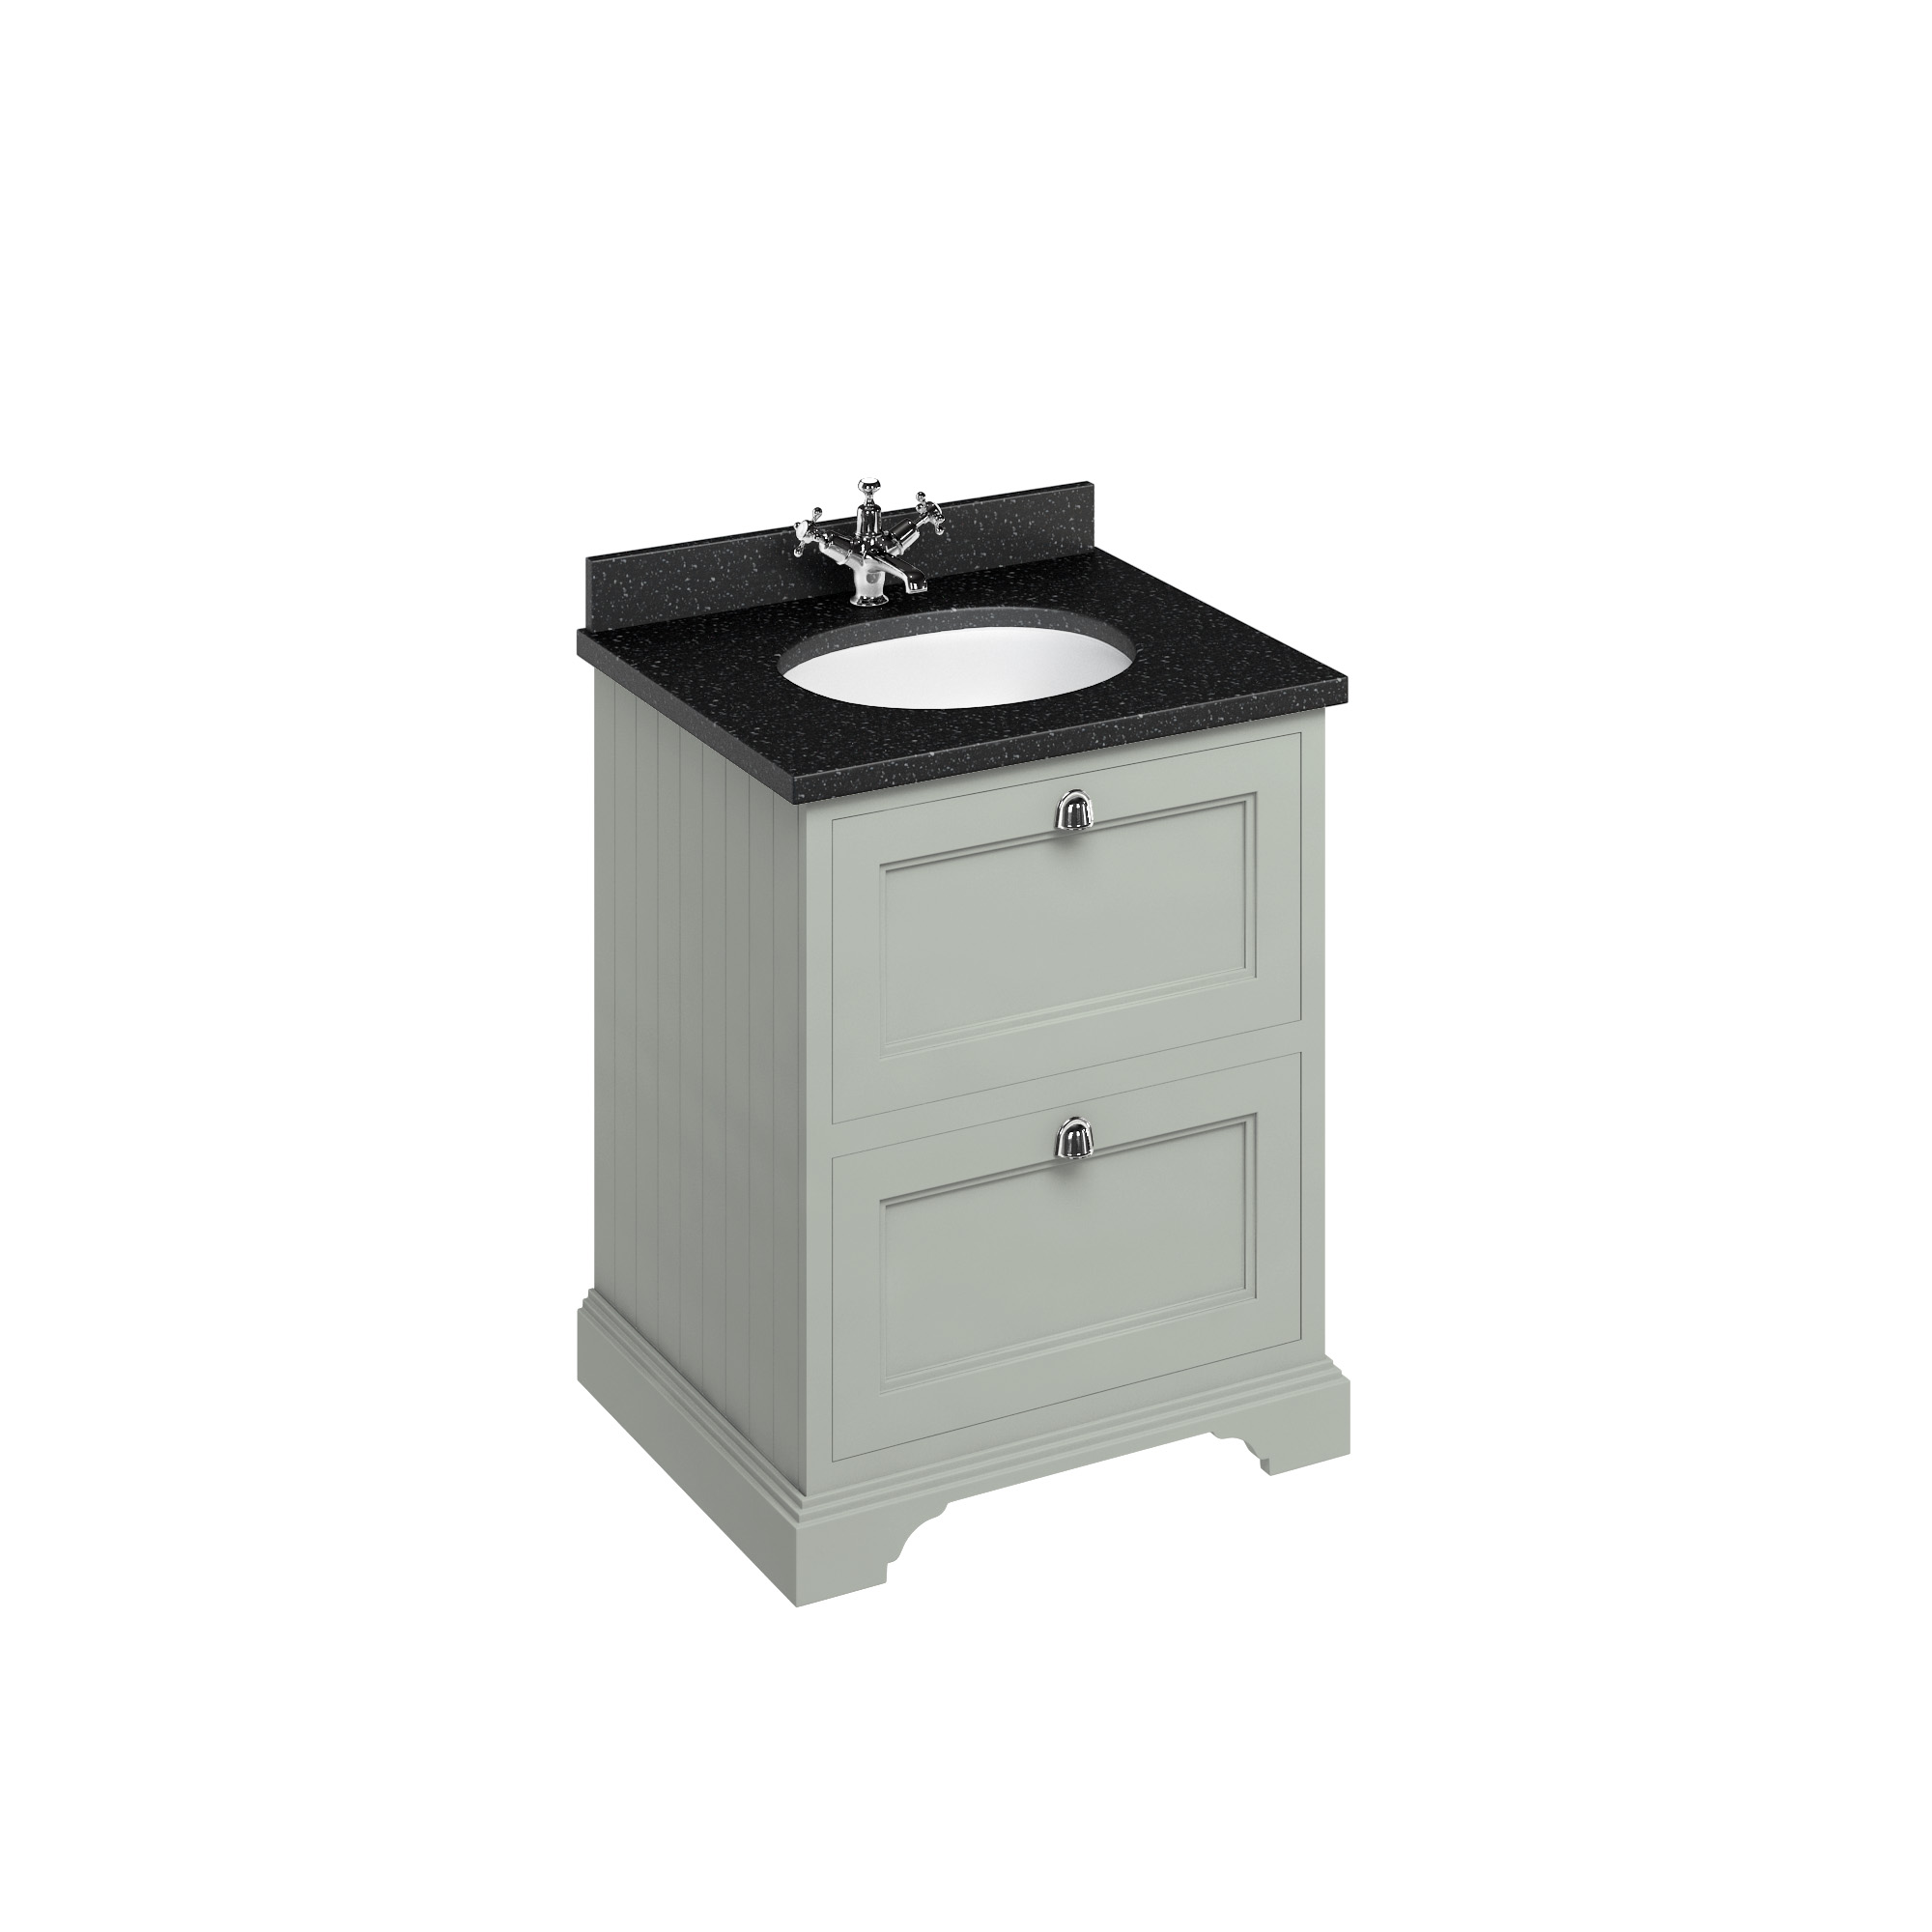 Freestanding 65 Vanity Unit with 2 drawers - Dark Olive and Minerva black granite worktop with integrated white basin